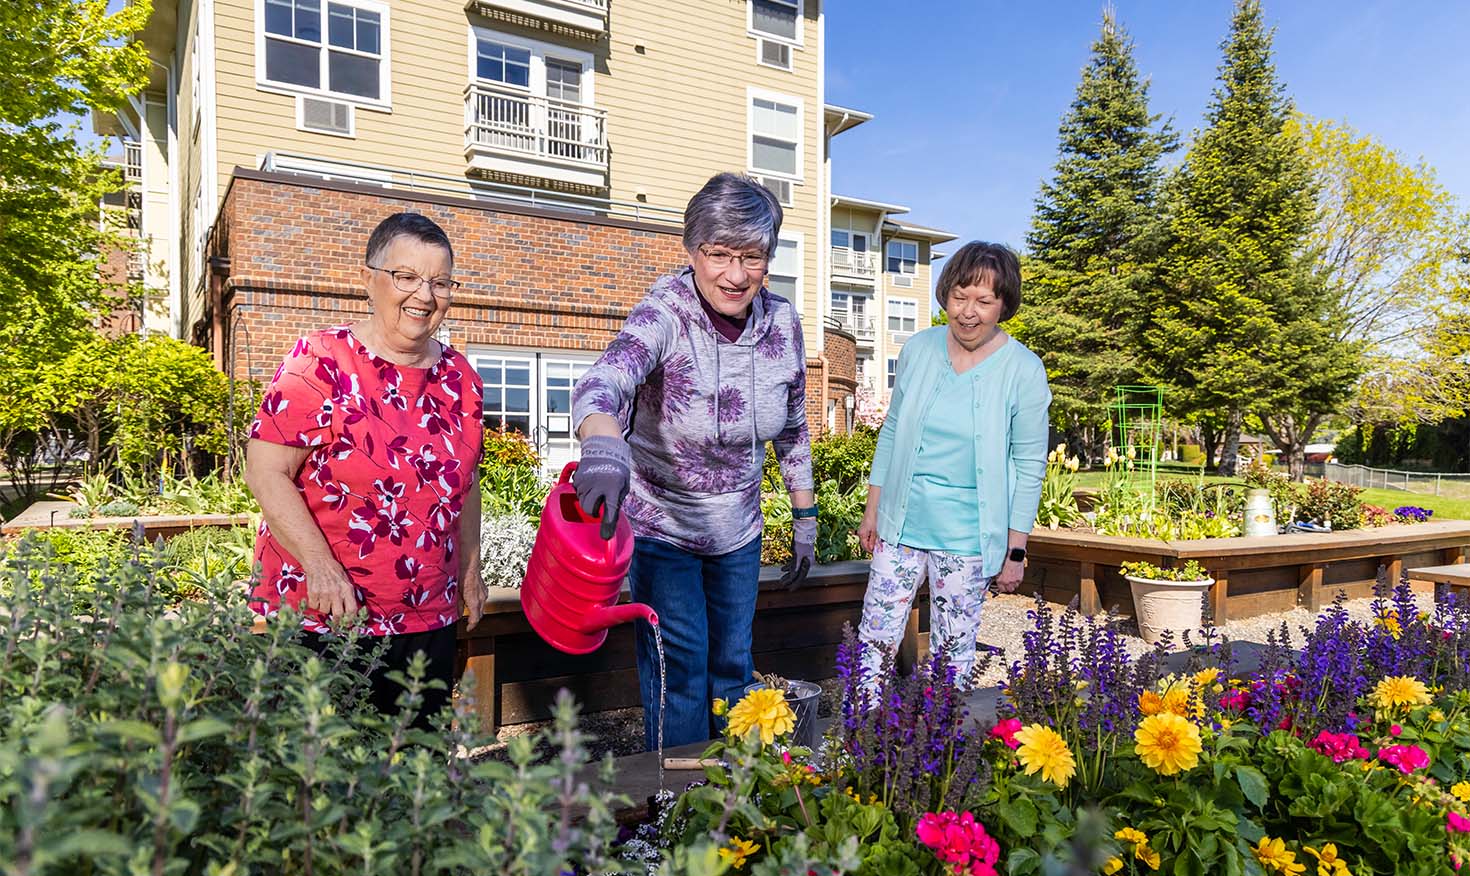 Senior woman watering flowers in the garden as two other senior women watch